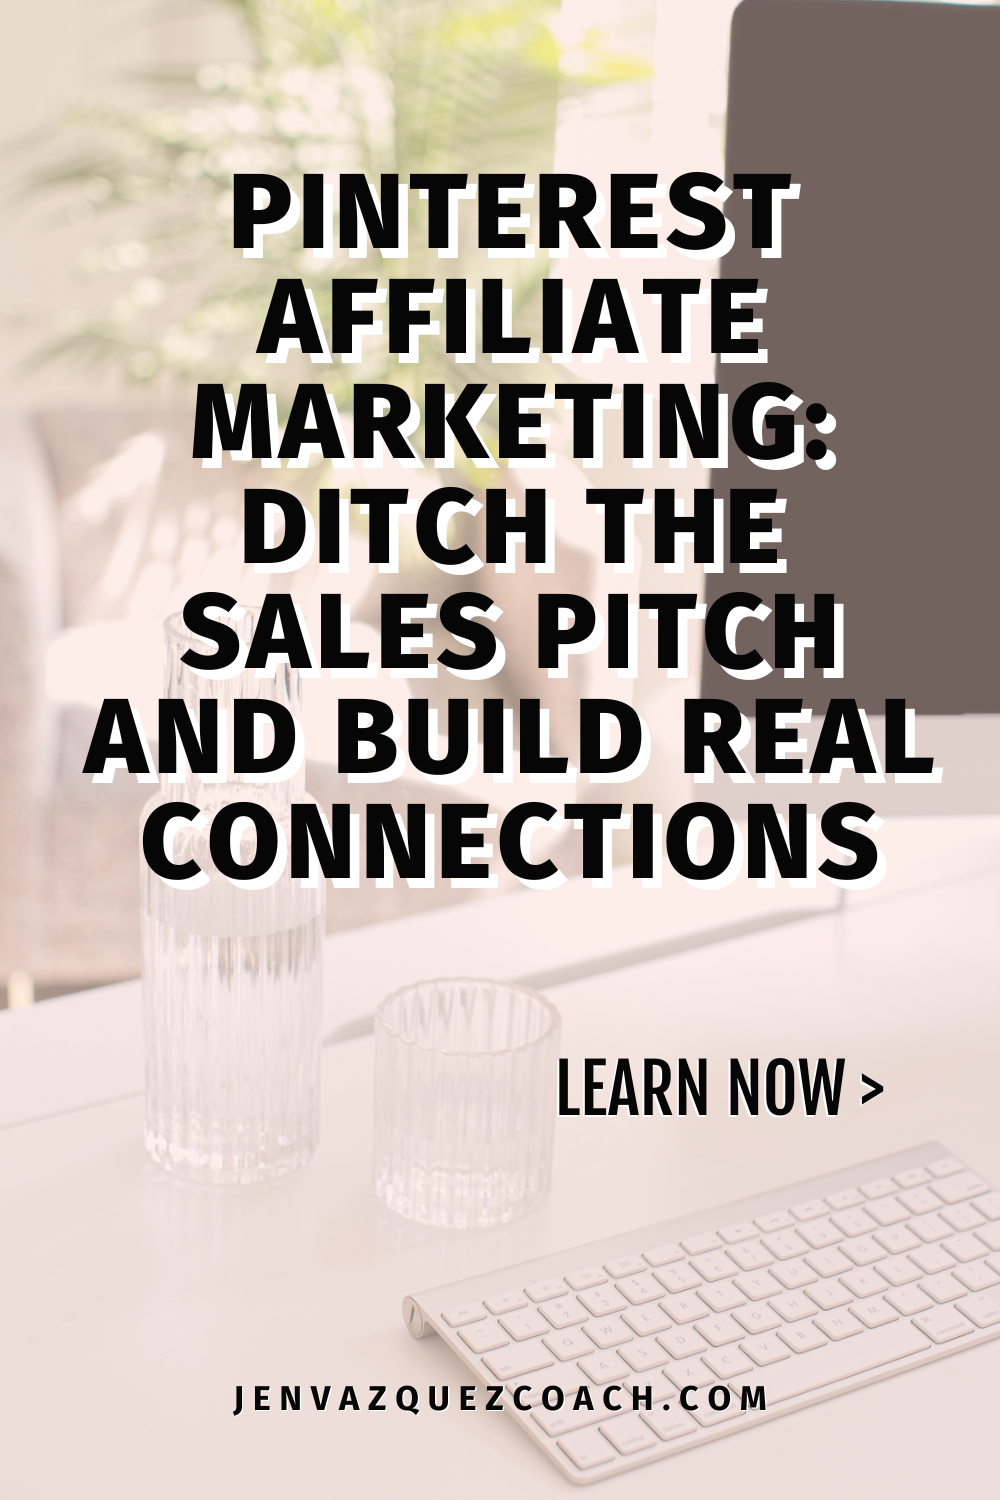 Today, we're jumping into the fabulous world of affiliate marketing on Pinterest. Whether you're a newbie or a seasoned pro, it's time to forget what you think you know about affiliate marketing and embrace a fresh, more genuine approach. by Jen Vazquez Media jenvazquezcoach.com